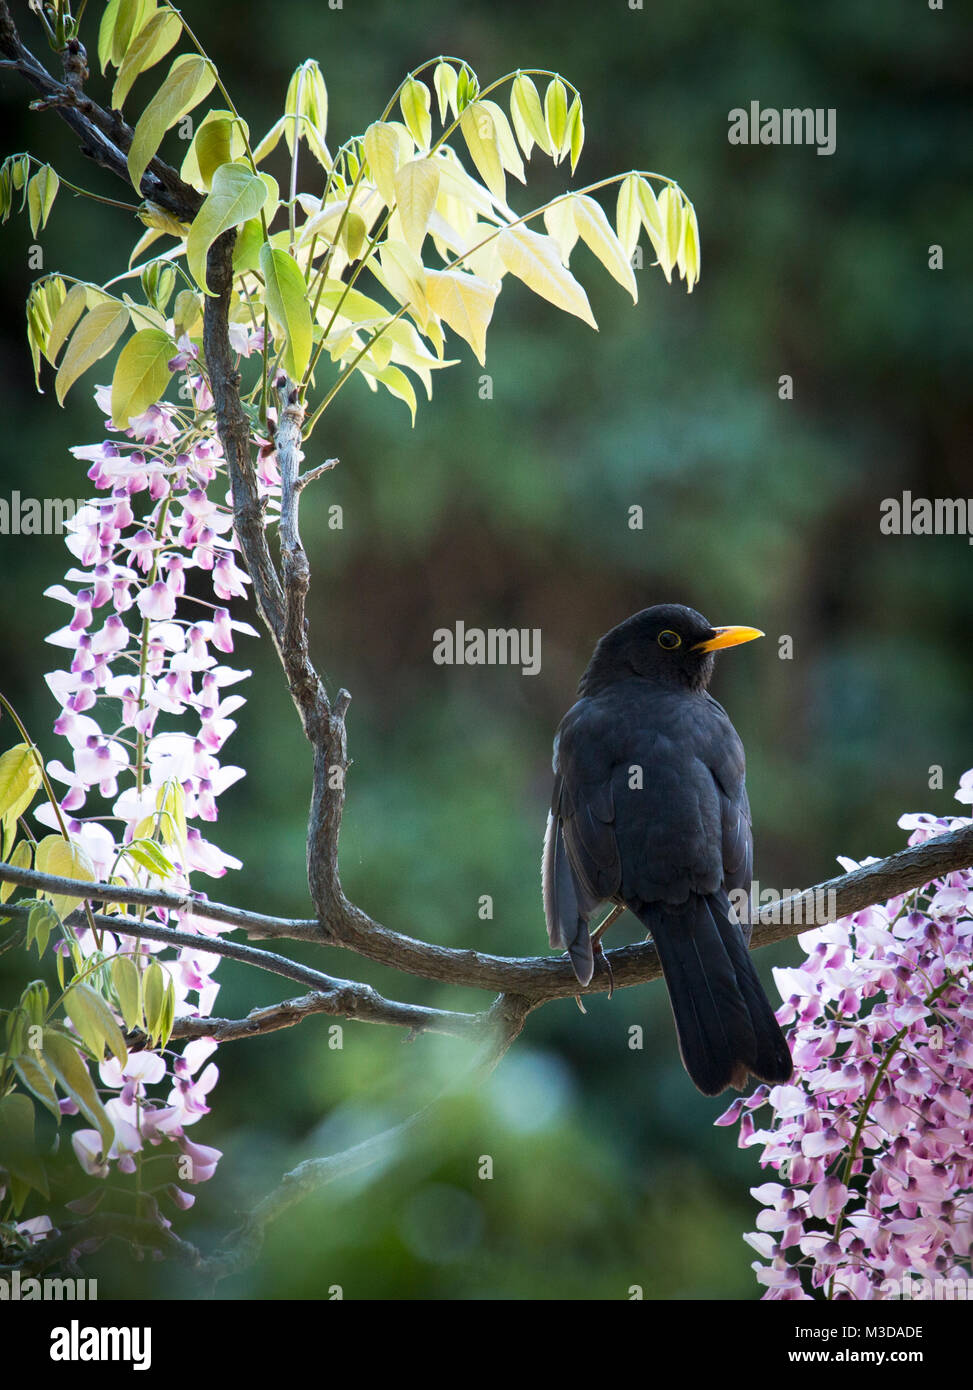 An adult blackbird photographed sitting on a pink flowering vine during the summer in the south of France. Stock Photo